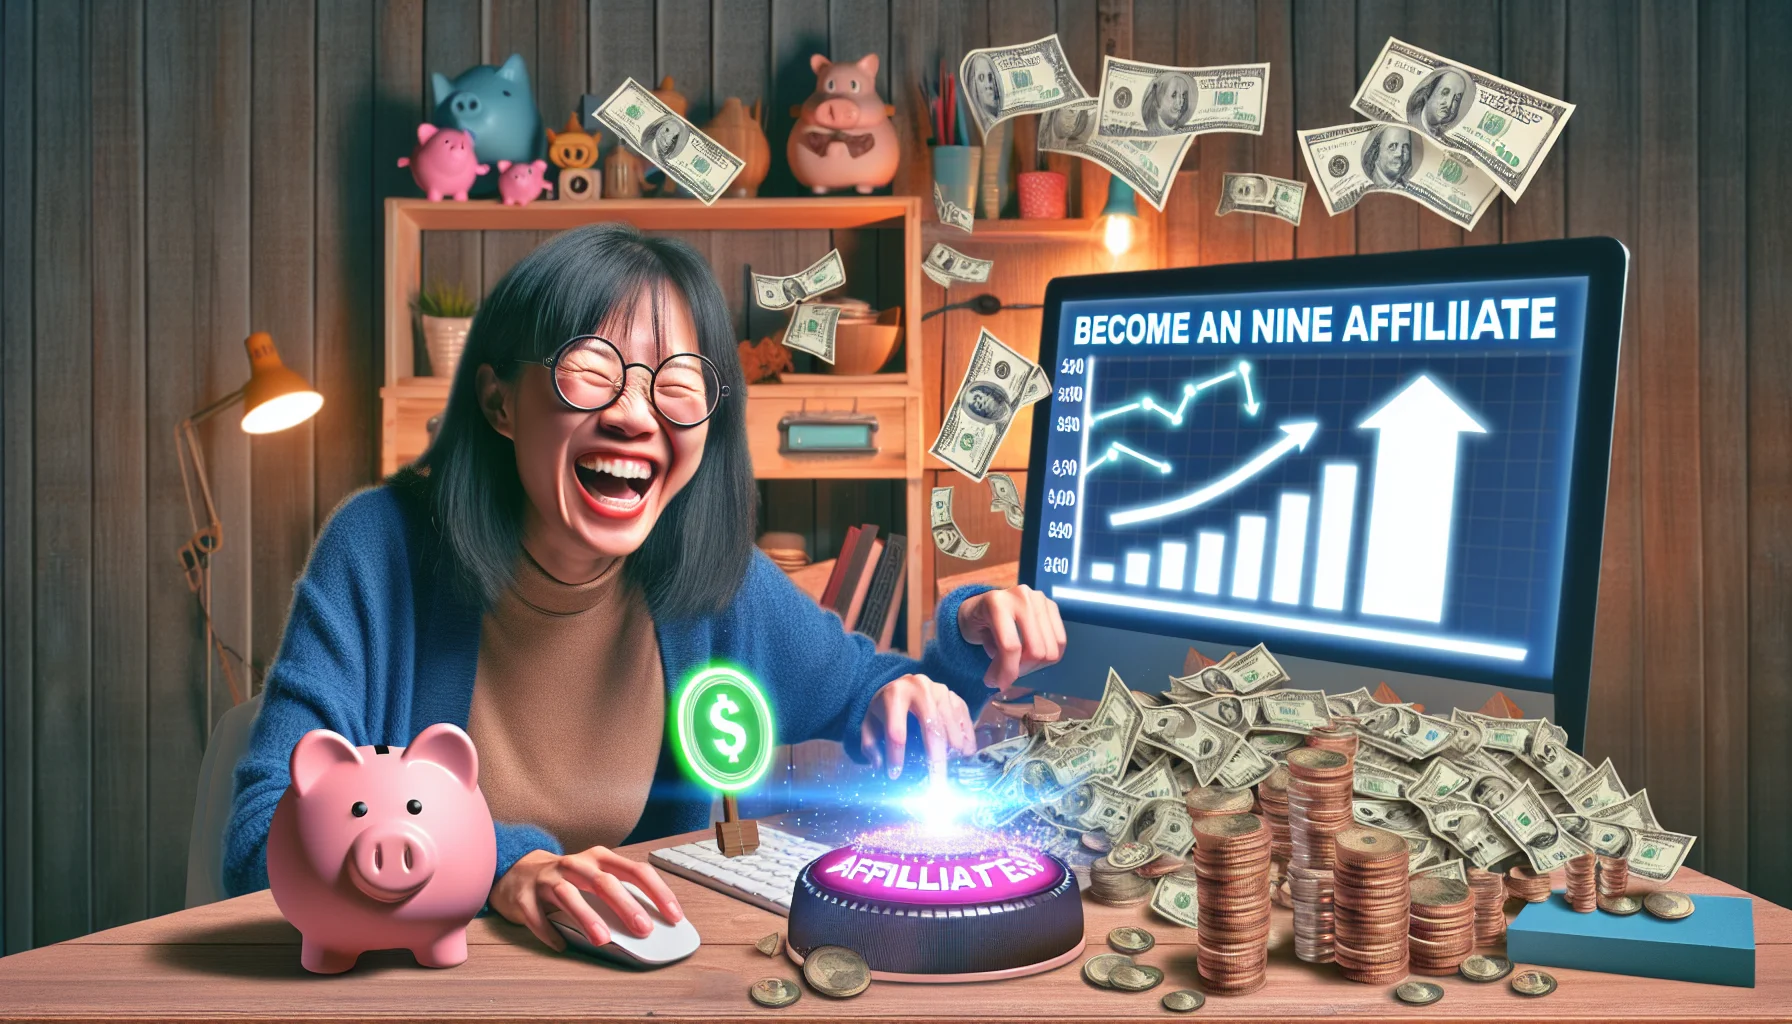 Visualize a humorous and lifelike scenario highlighting an individual becoming an online affiliate for an e-commerce platform. The setting is a home workspace, filled with eccentric items that symbolize prosperity and wealth, such as a computer screen displays increasing bar graphs and charts, a desk overflowing with novelty oversized coins and dollar bills, and quirky piggy banks lined up on a shelf. In this lighthearted scene, an Asian woman is laughing while holding a glowing affiliate badge shaped like a 'money-making' button, her other hand clicks a mouse, releasing a trail of digital currency particles.